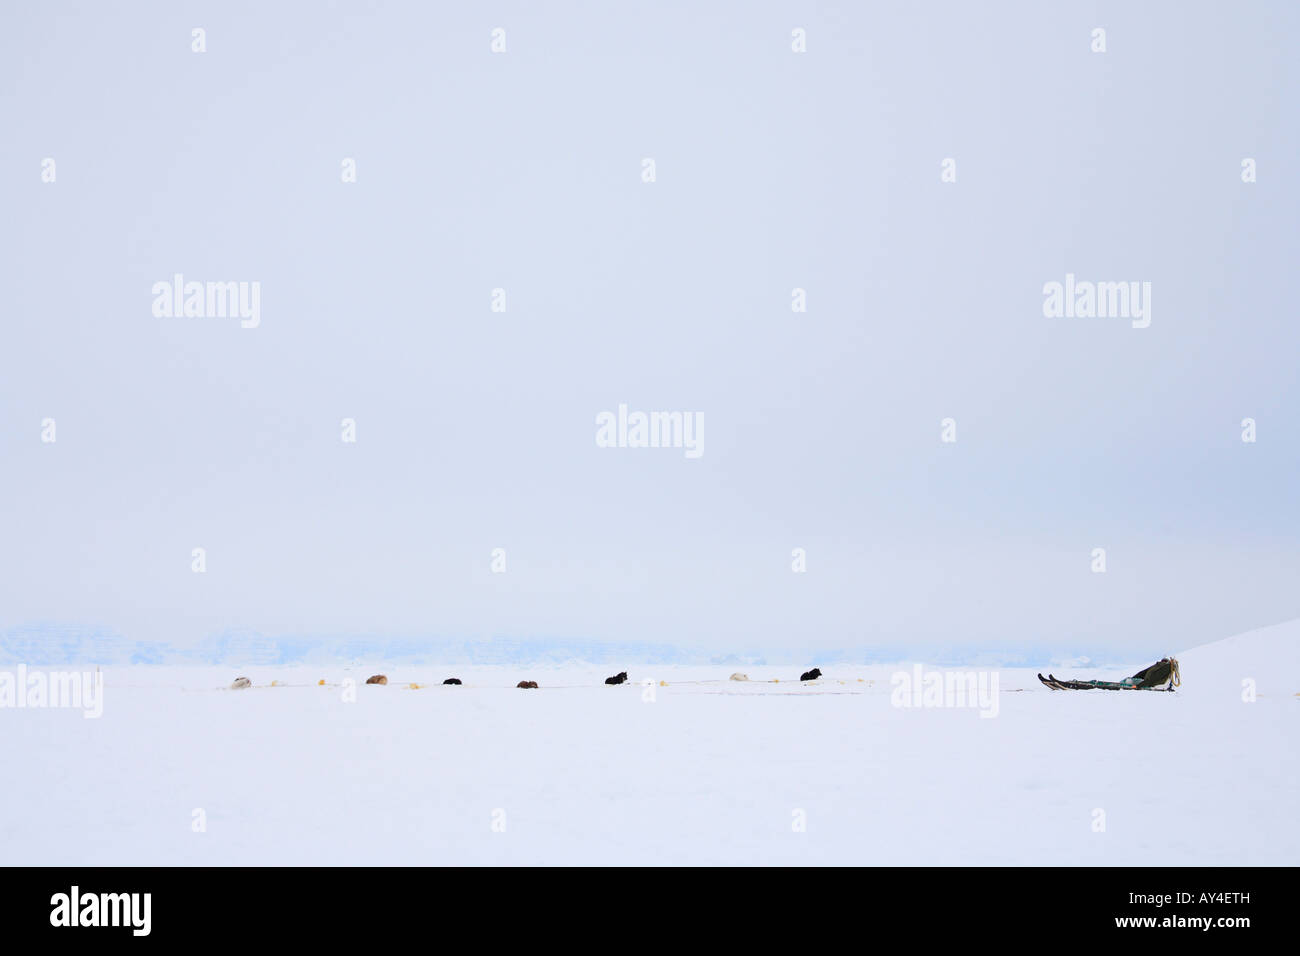 Greenland Dogs and sled on sea ice, Ittoqqortoormiit, East Greenland Stock Photo